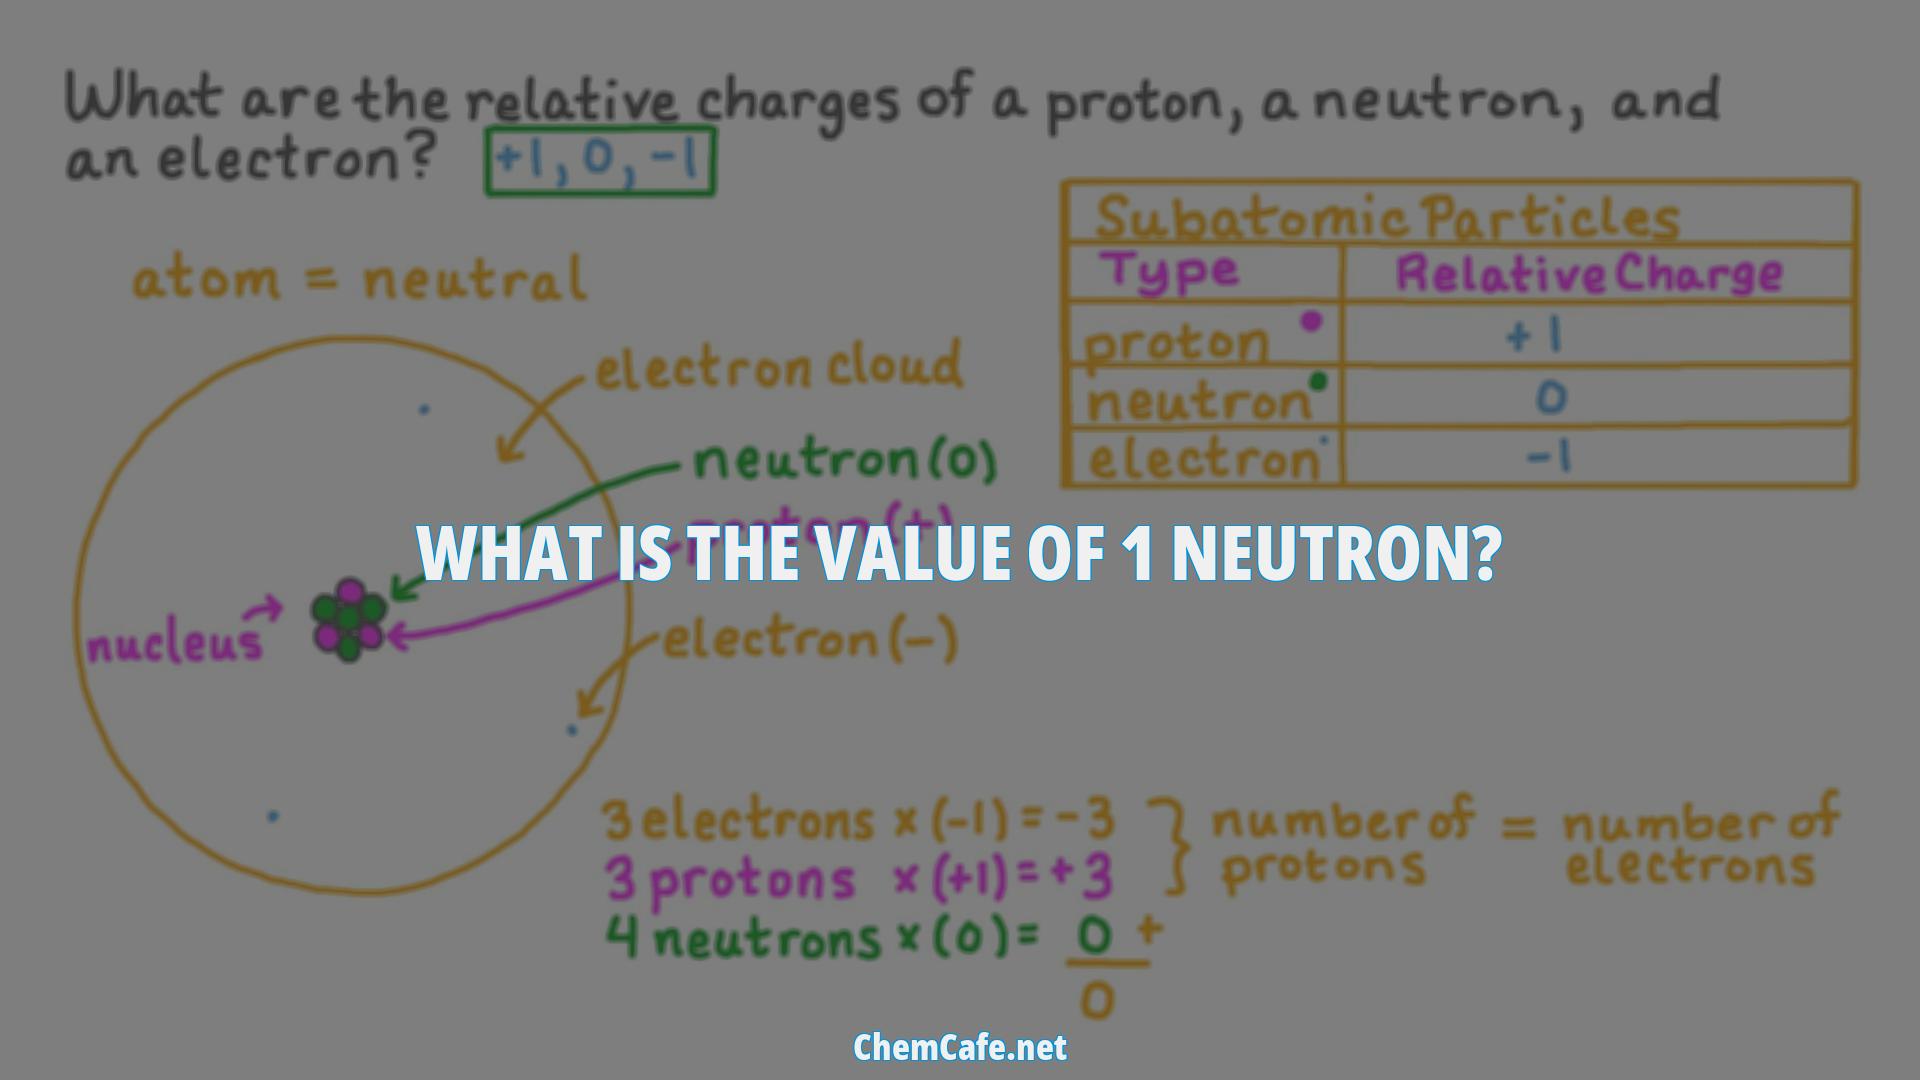 what is the value of 1 neutron?